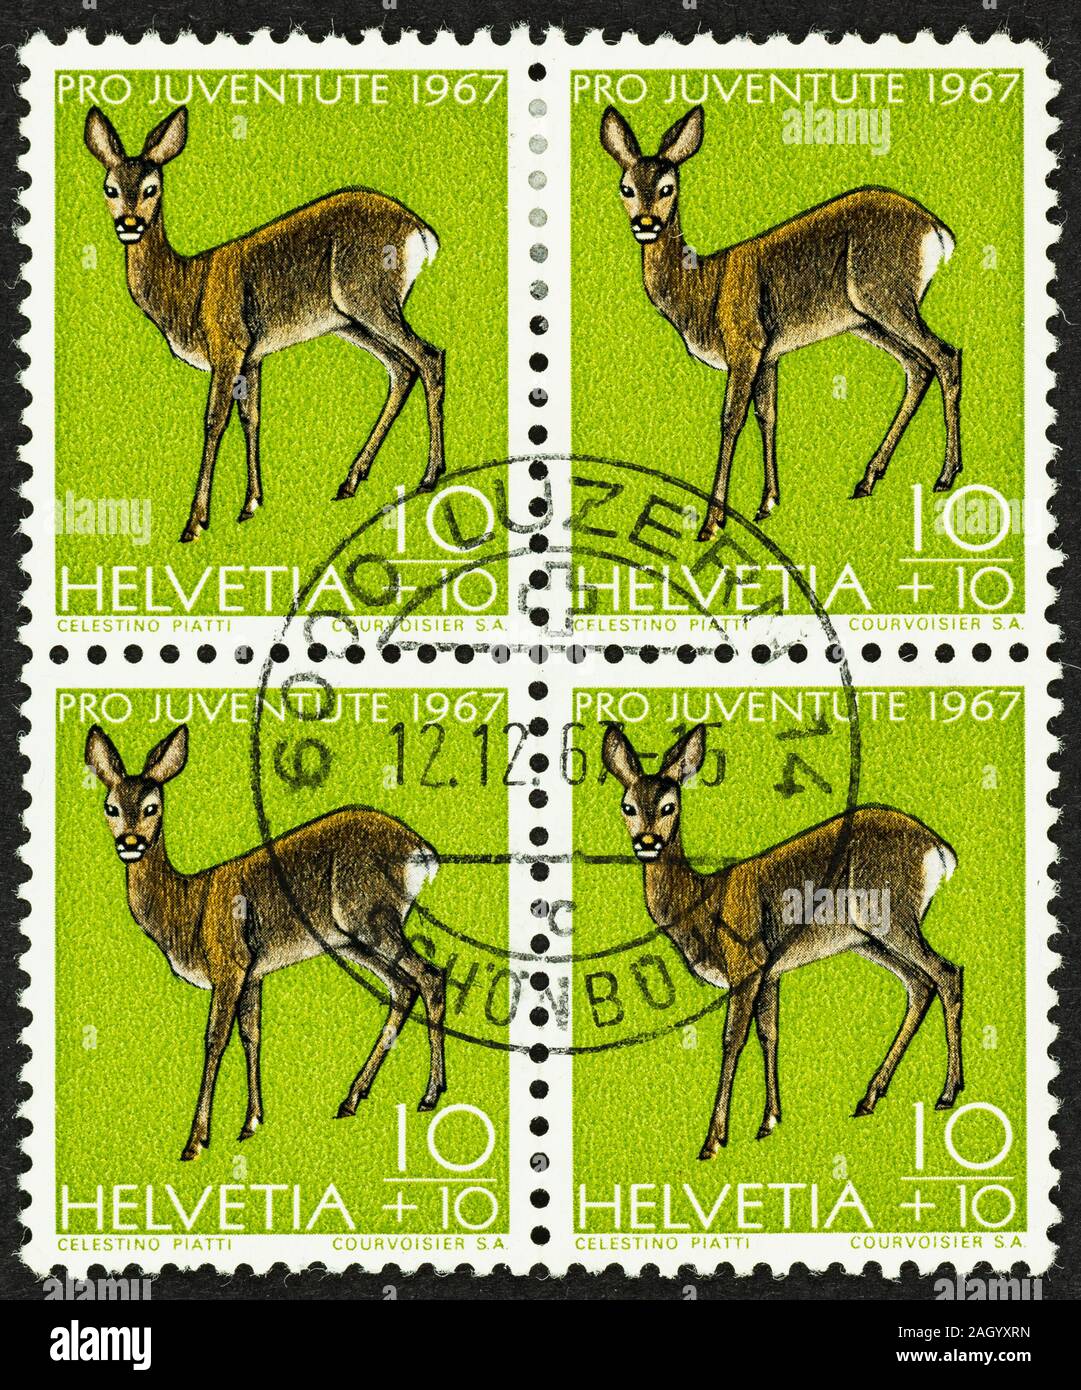 Close up of Pro Juventute postage of Switzerland with Roe deer. A block of 4 green 10+10 centime surcharged  postage stamps issued for charity in 1967. Stock Photo